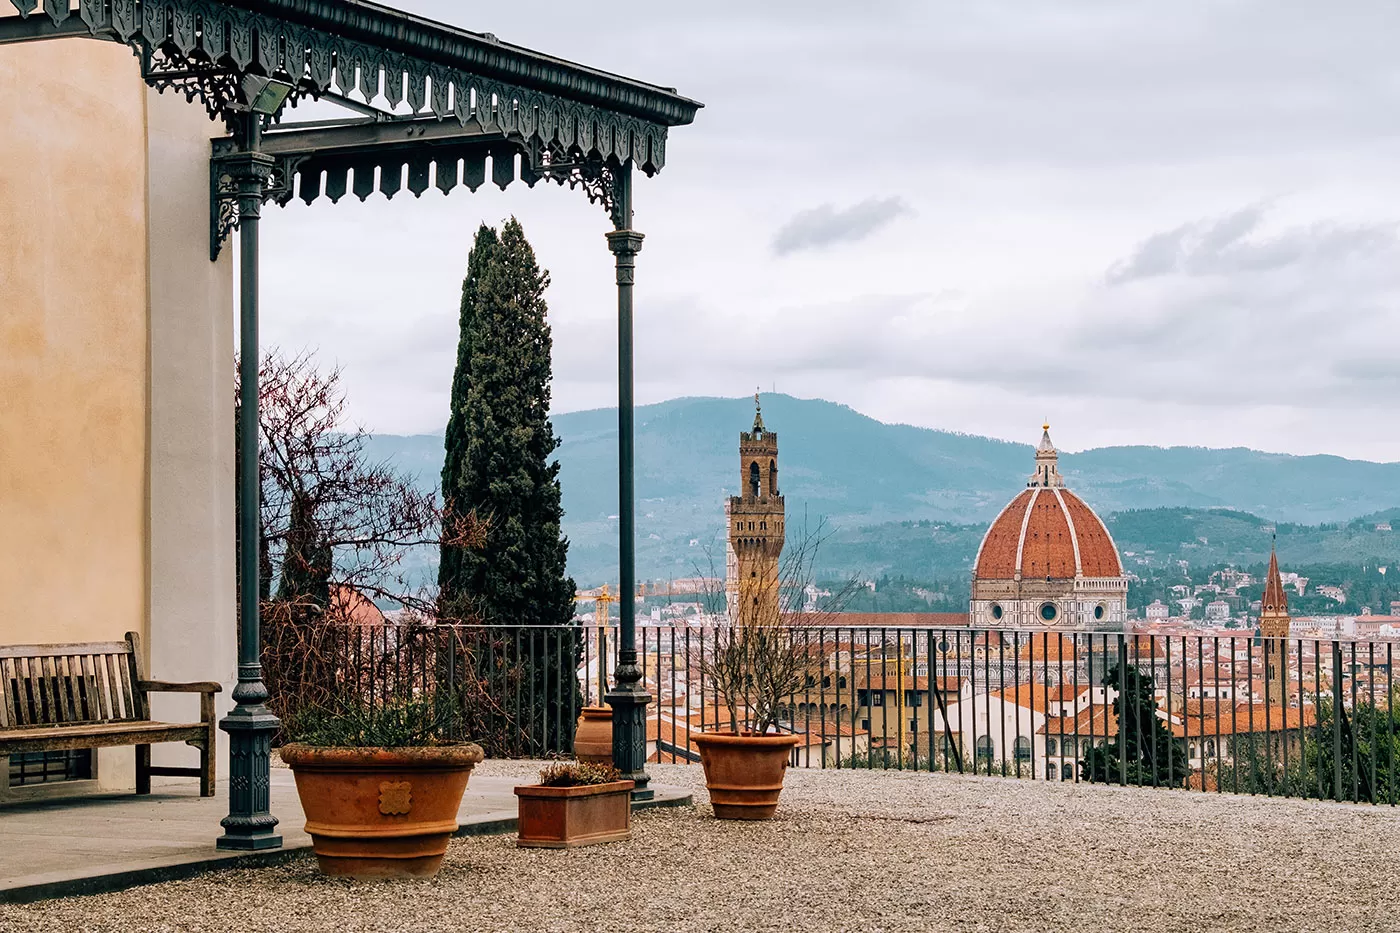 Best things to do in Florence - Villa Bardini - Bardini Gardens - View of Duomo